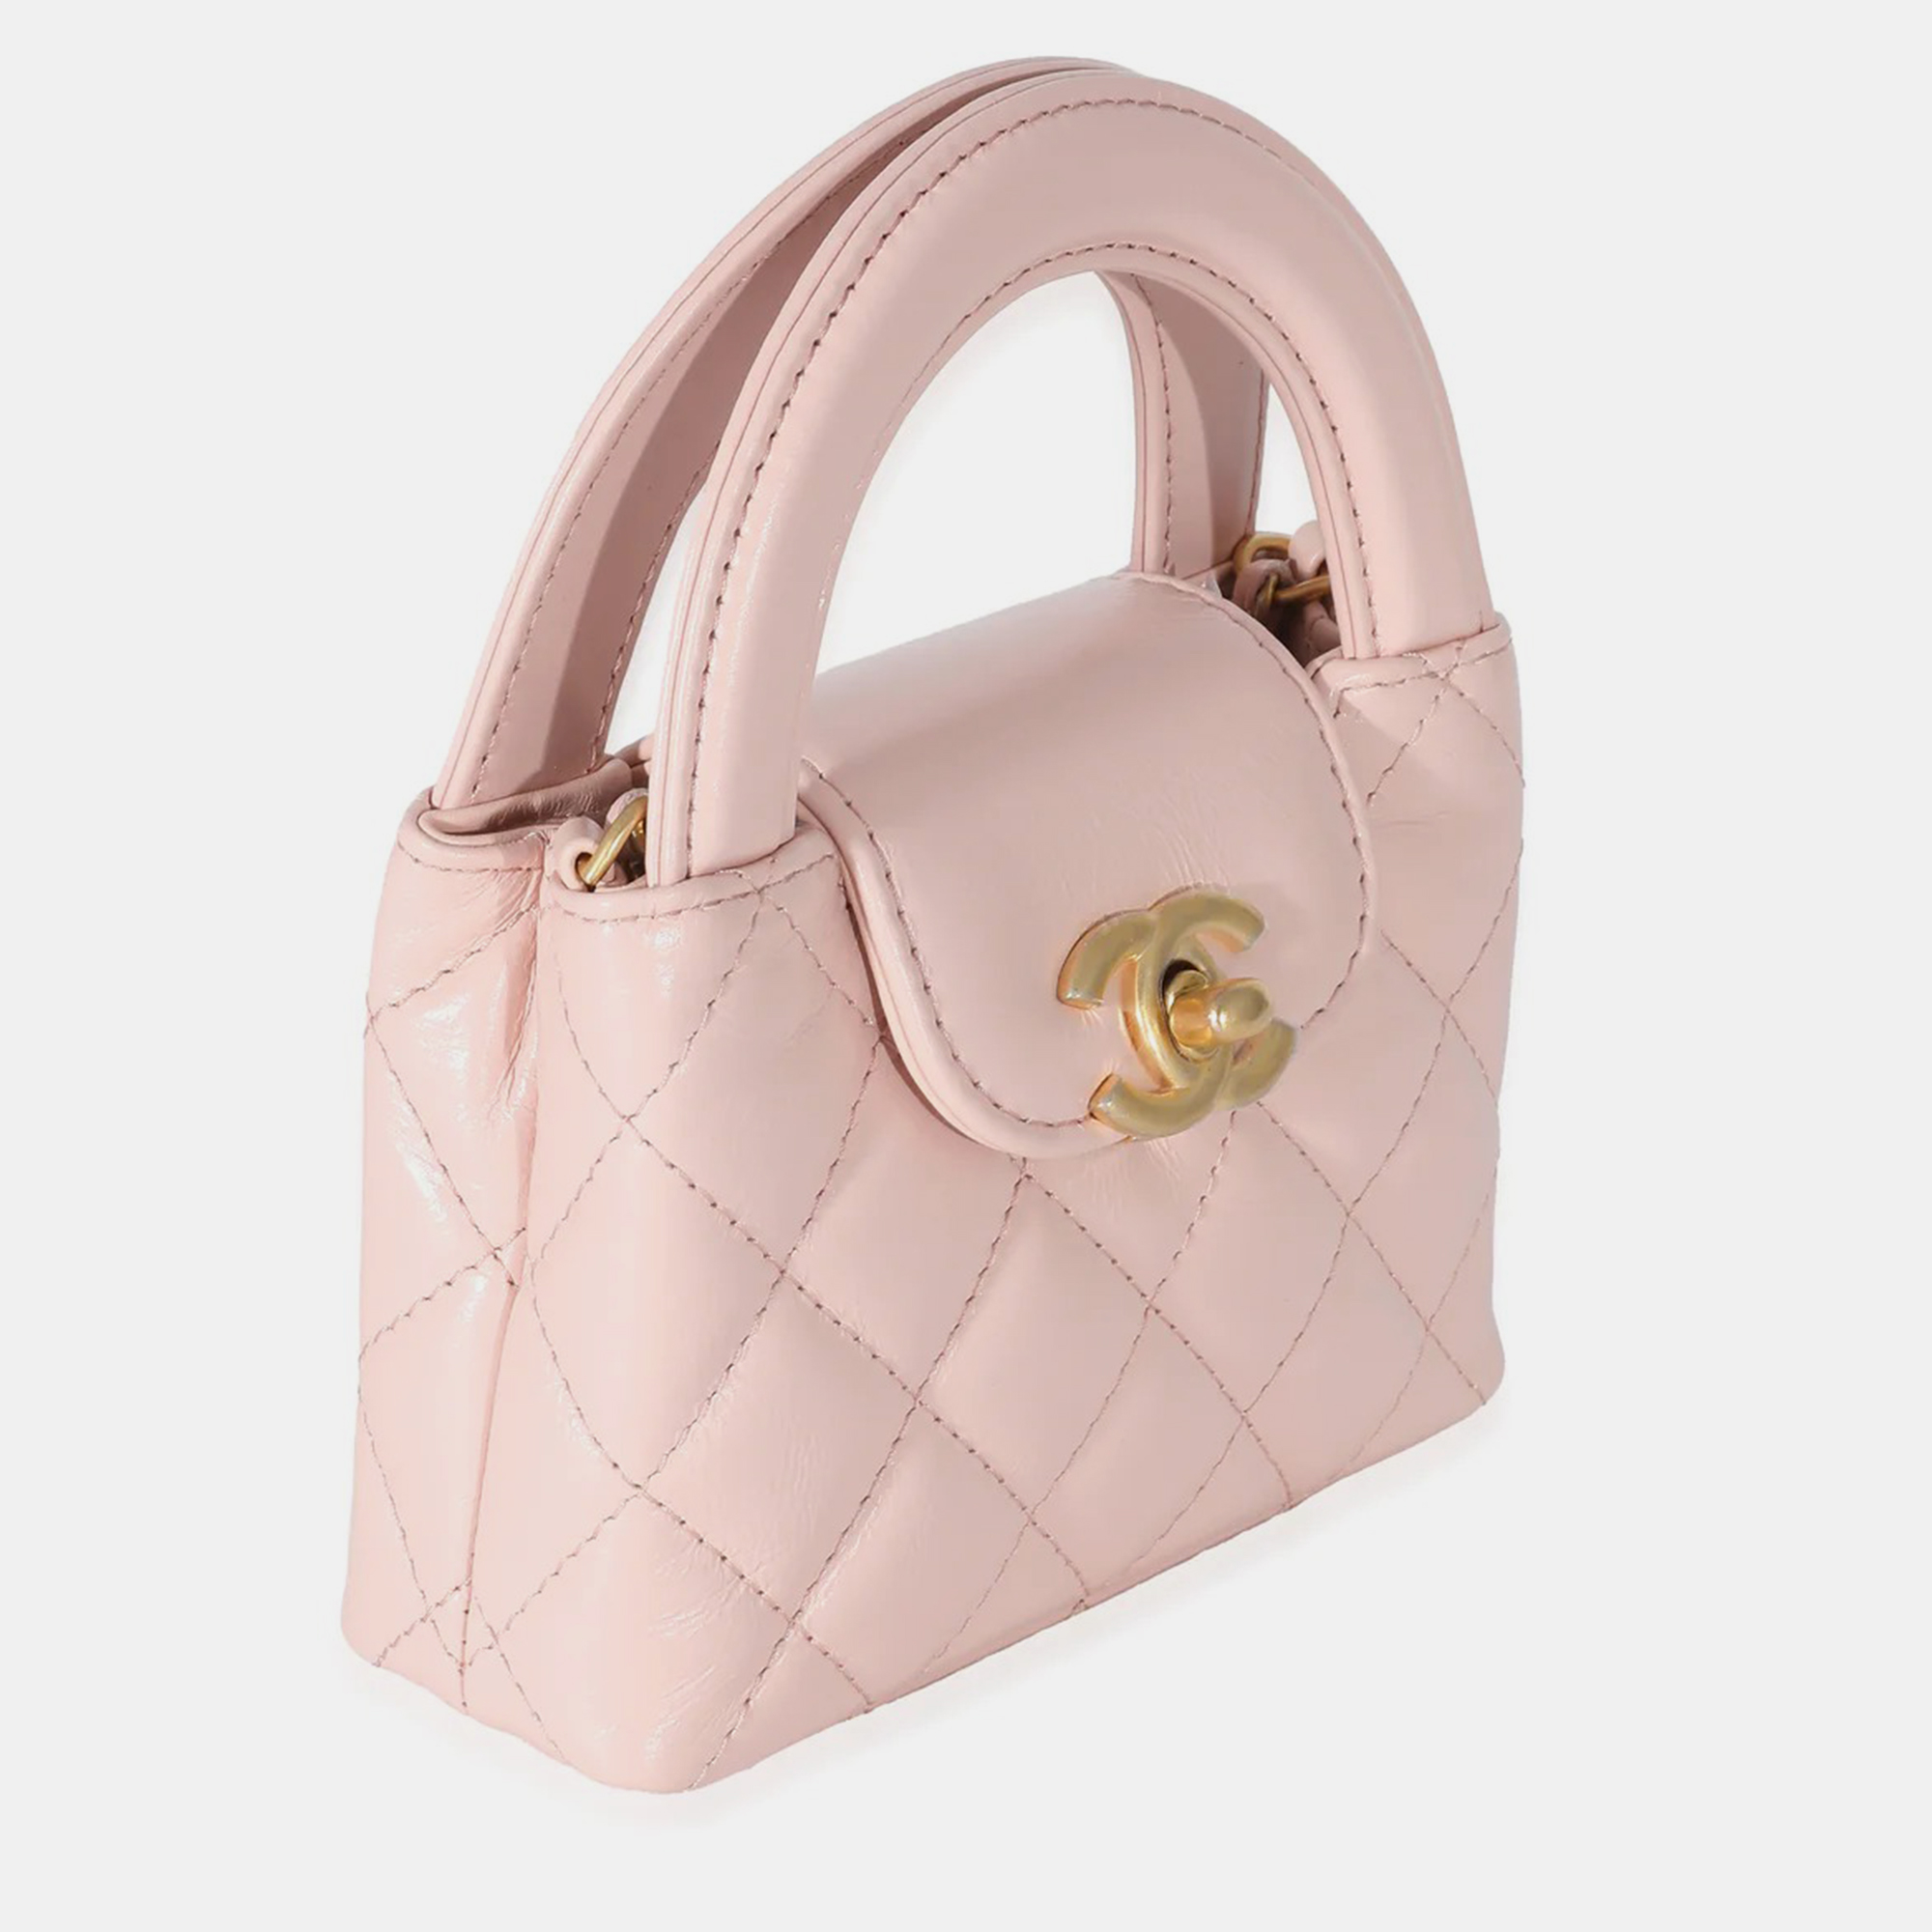 Chanel Coral Pink Quilted Shiny Aged Calfskin Mini Nano Kelly Shopper